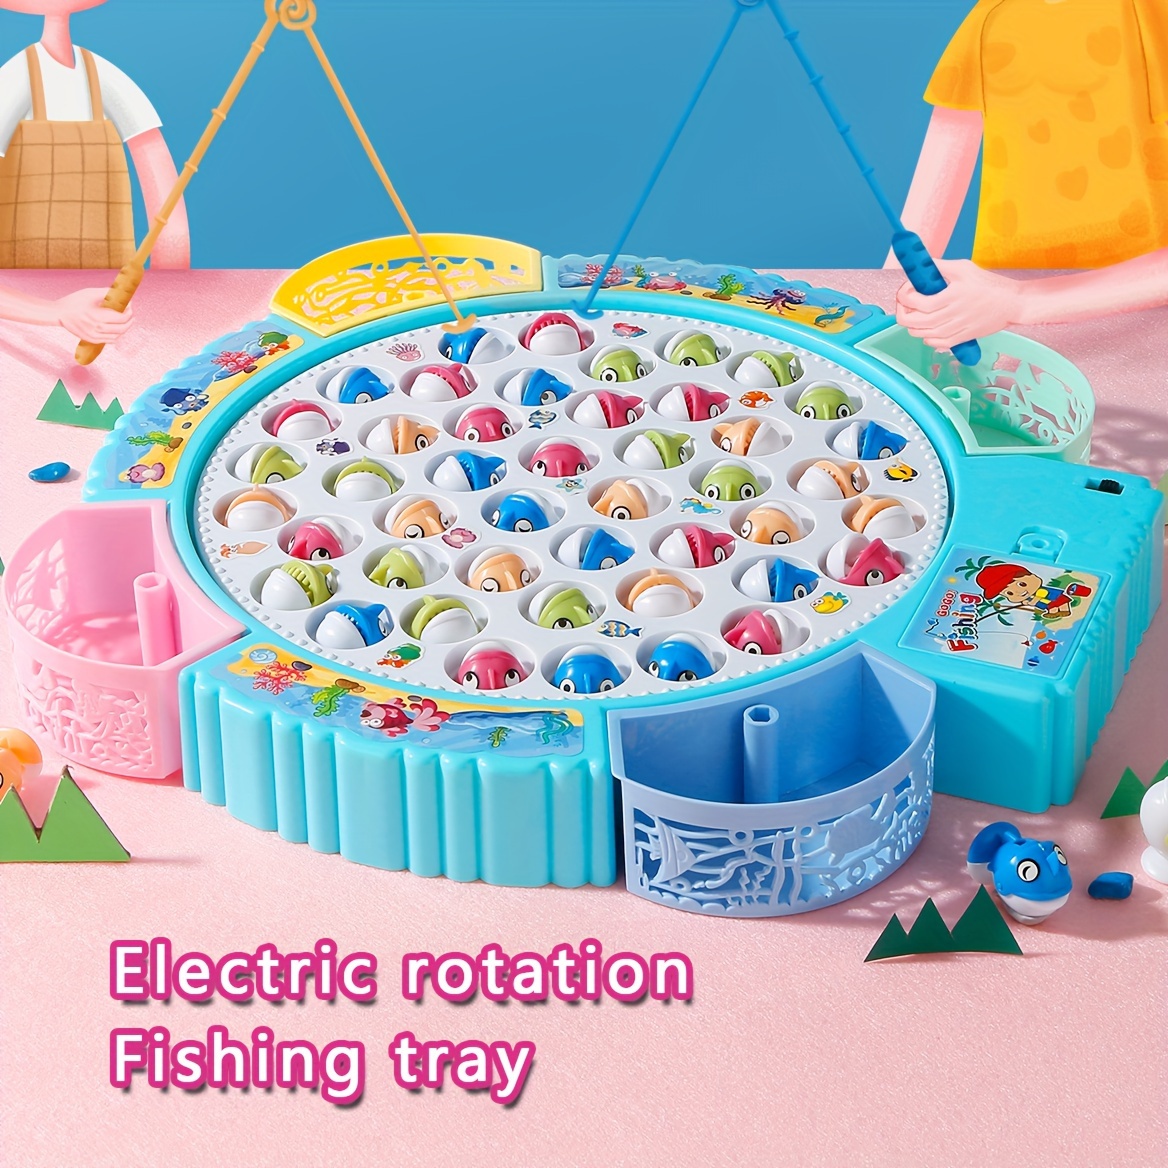 

Kids Fishing Toys, Electric Rotating Music Parent-child Interaction 3-6 Years Old, Color Box Packaging - For Halloween, Christmas, Thanksgiving Gifts